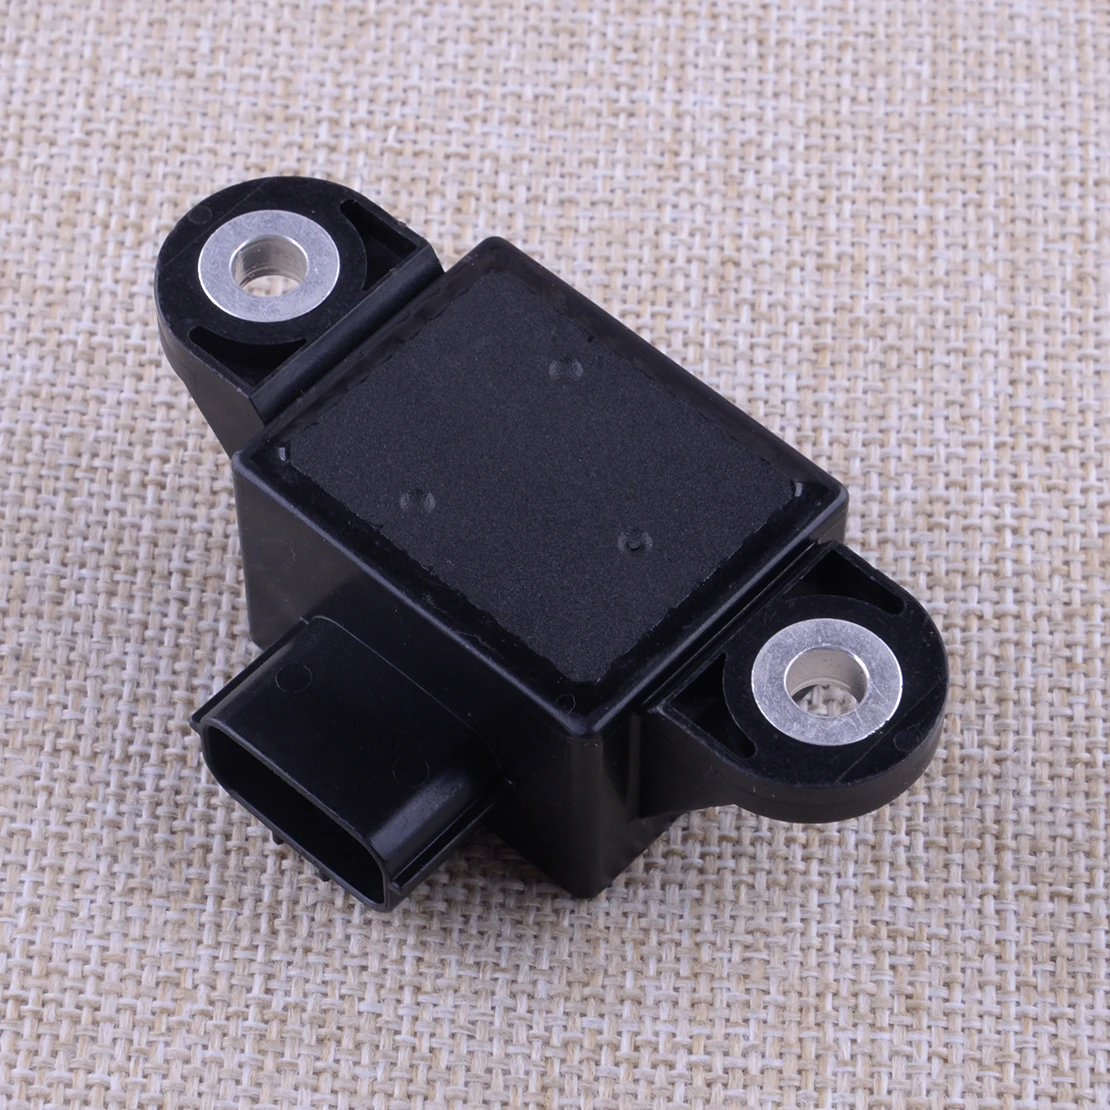 

Car Front Driver Side YAW Sensor EWTS53AA Fit for Hummer H3T H3 2009 2010 15096372 25927021 SU13537 MR527442 MN116715